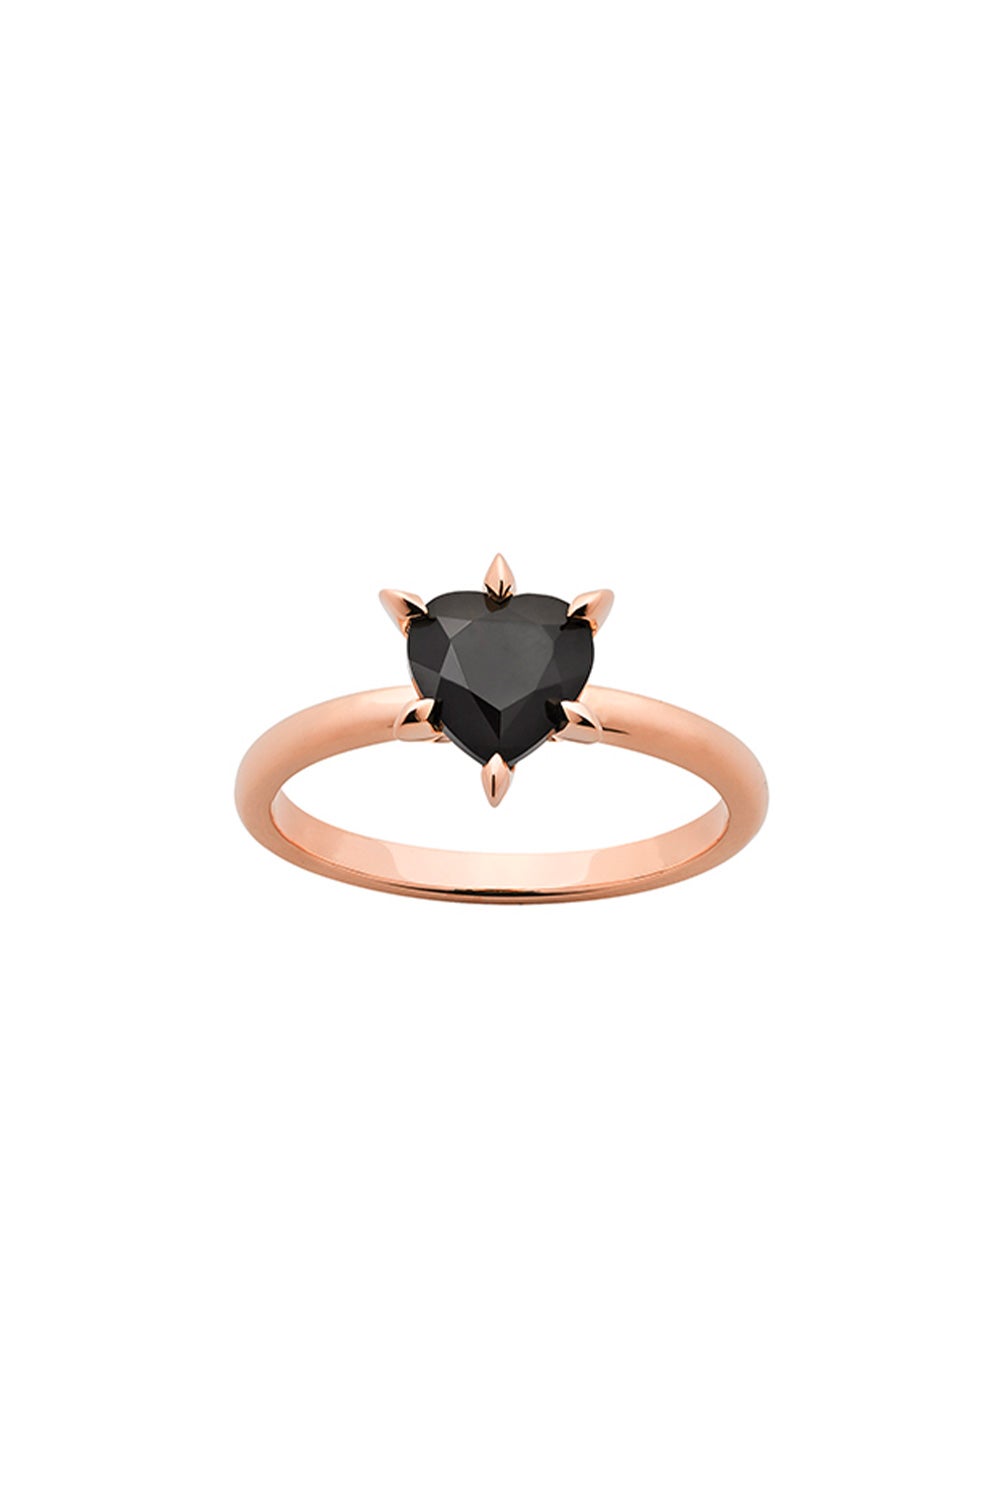 Cupid's Heart Ring Rose Gold Onyx